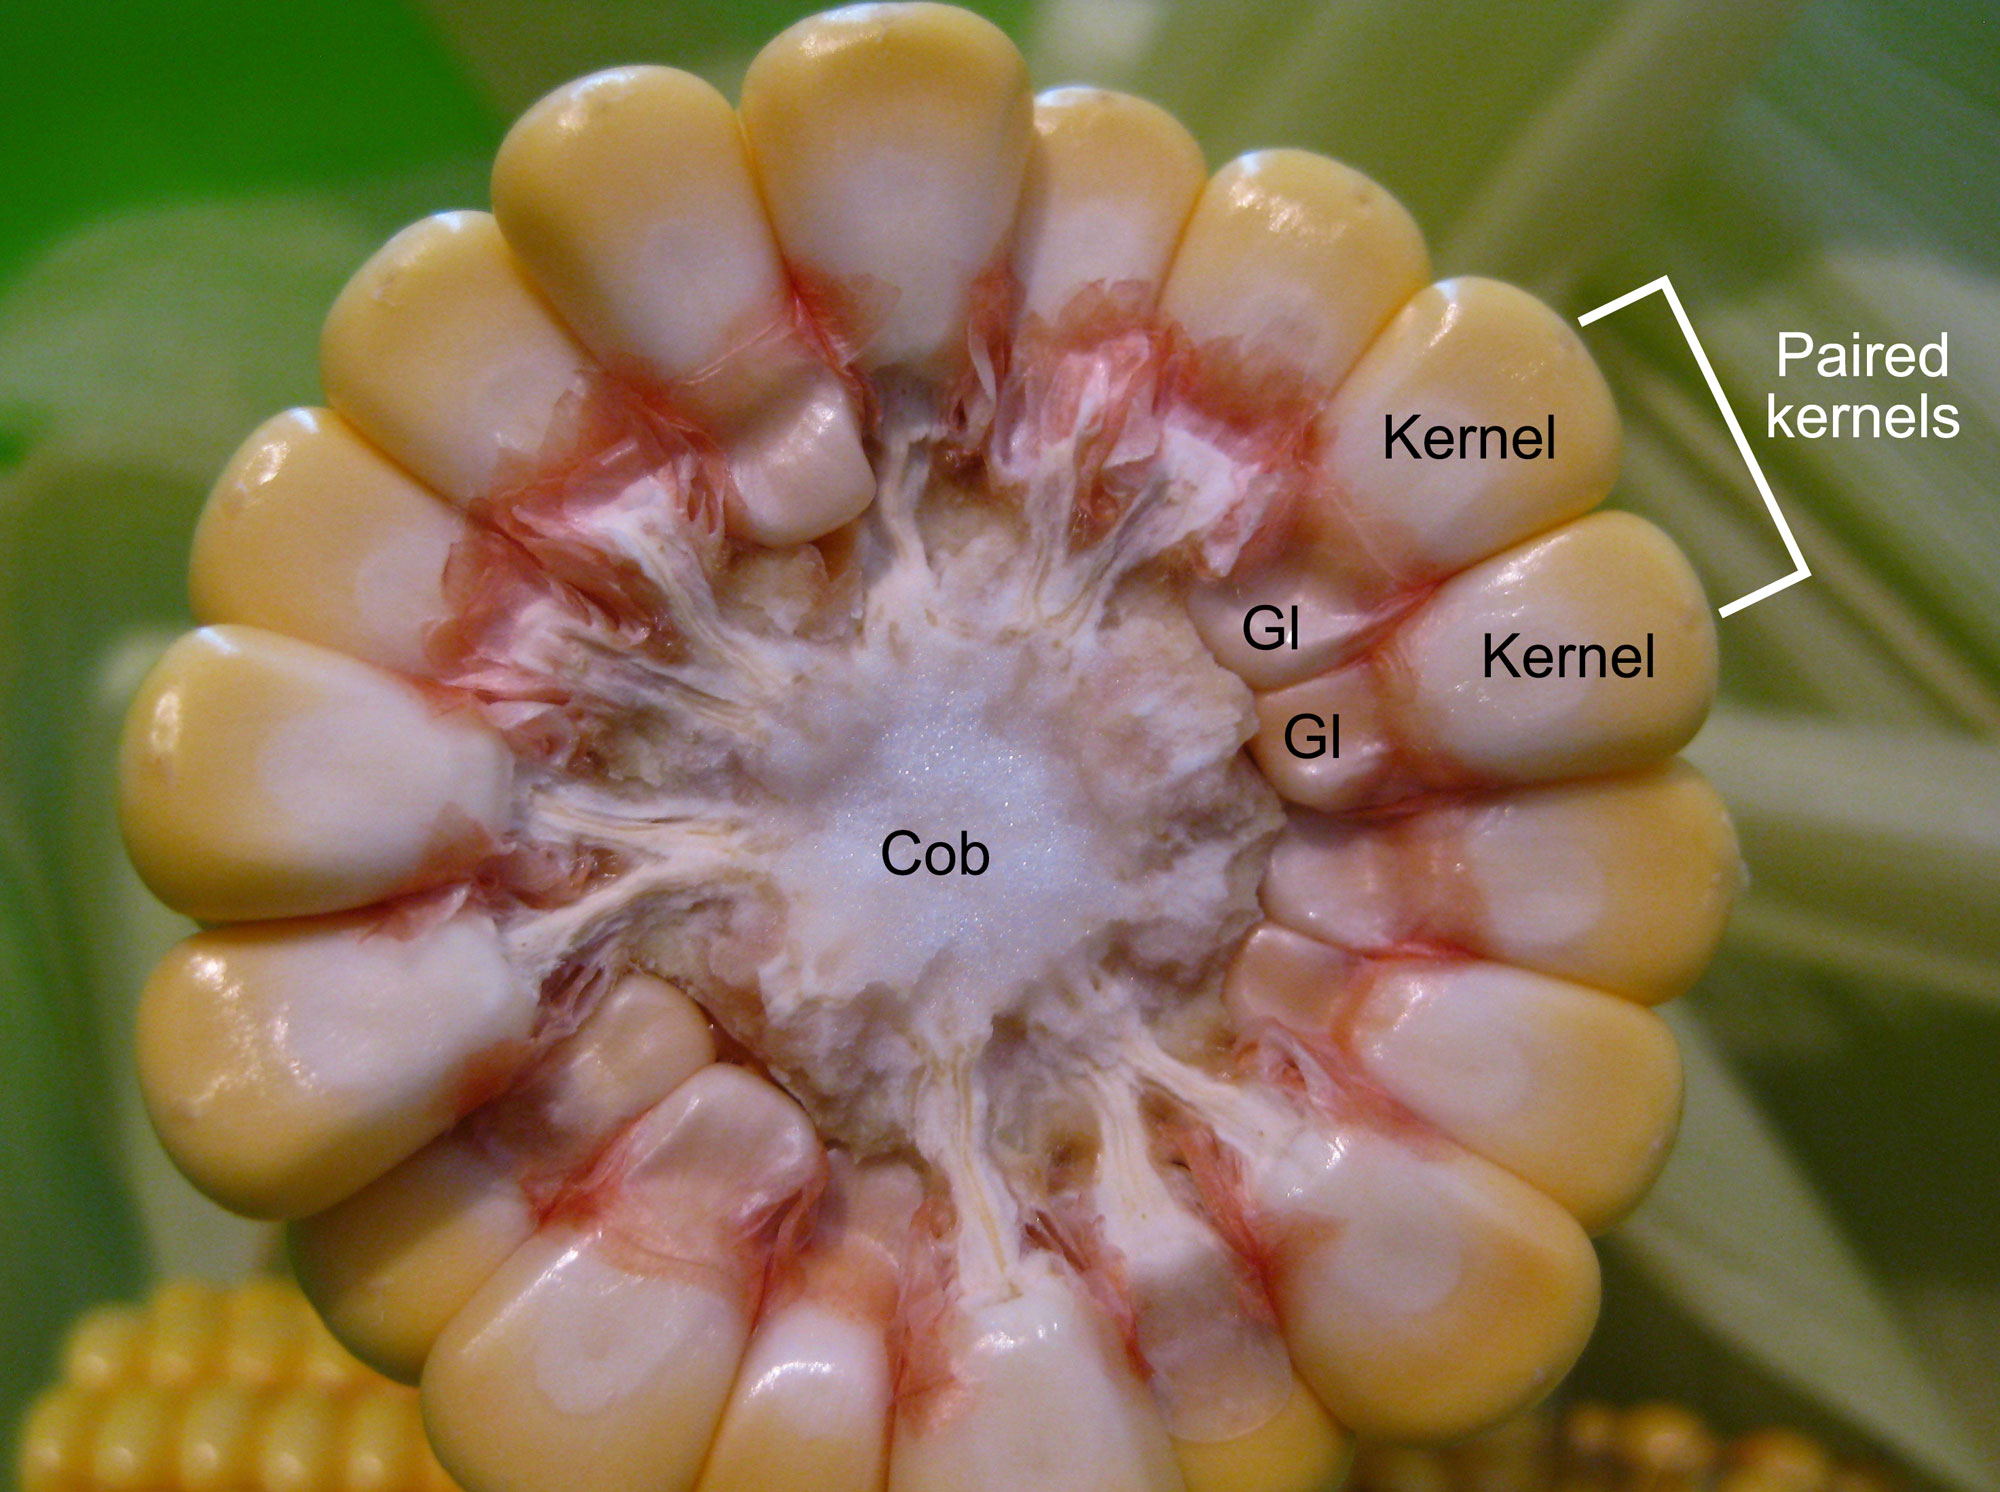 Photograph of an ear of corn cut transversely to exposed the kernels encircling and attached to the cob. A pair of kernels, their glumes, and the central cob are labeled.